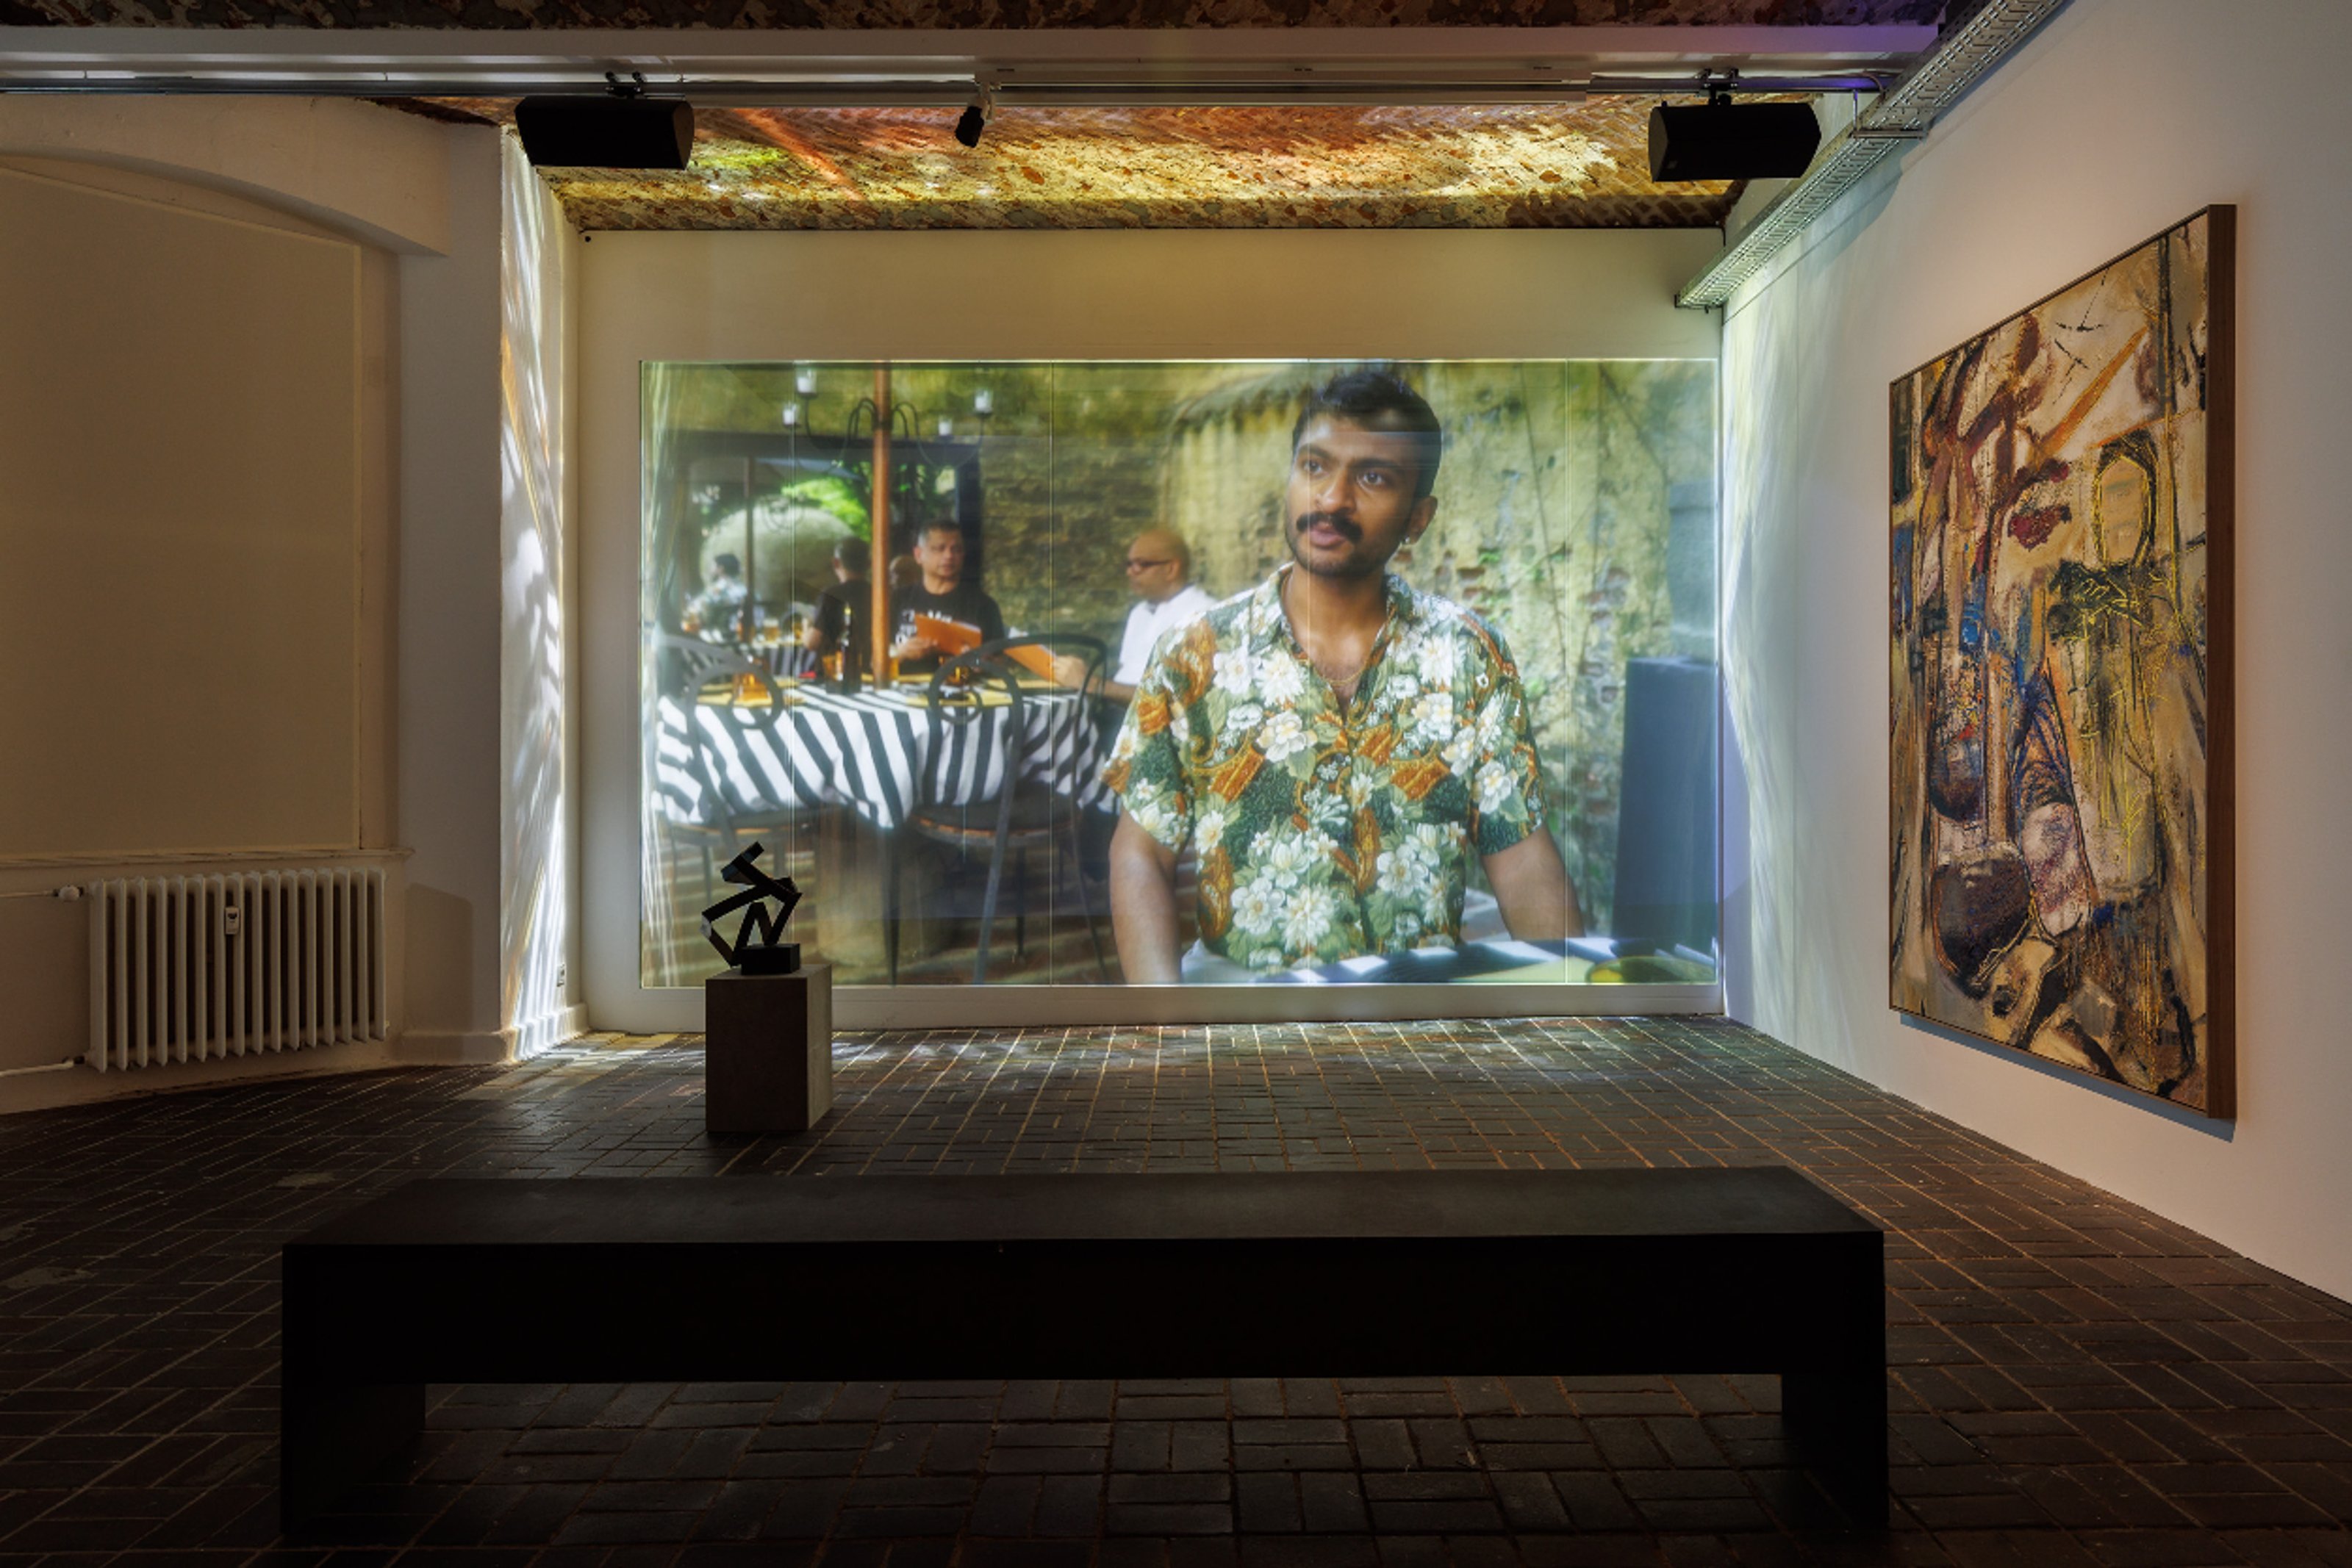 Video of a mustachioed man in a flowered shirt shown on a giant screen in an art gallery.